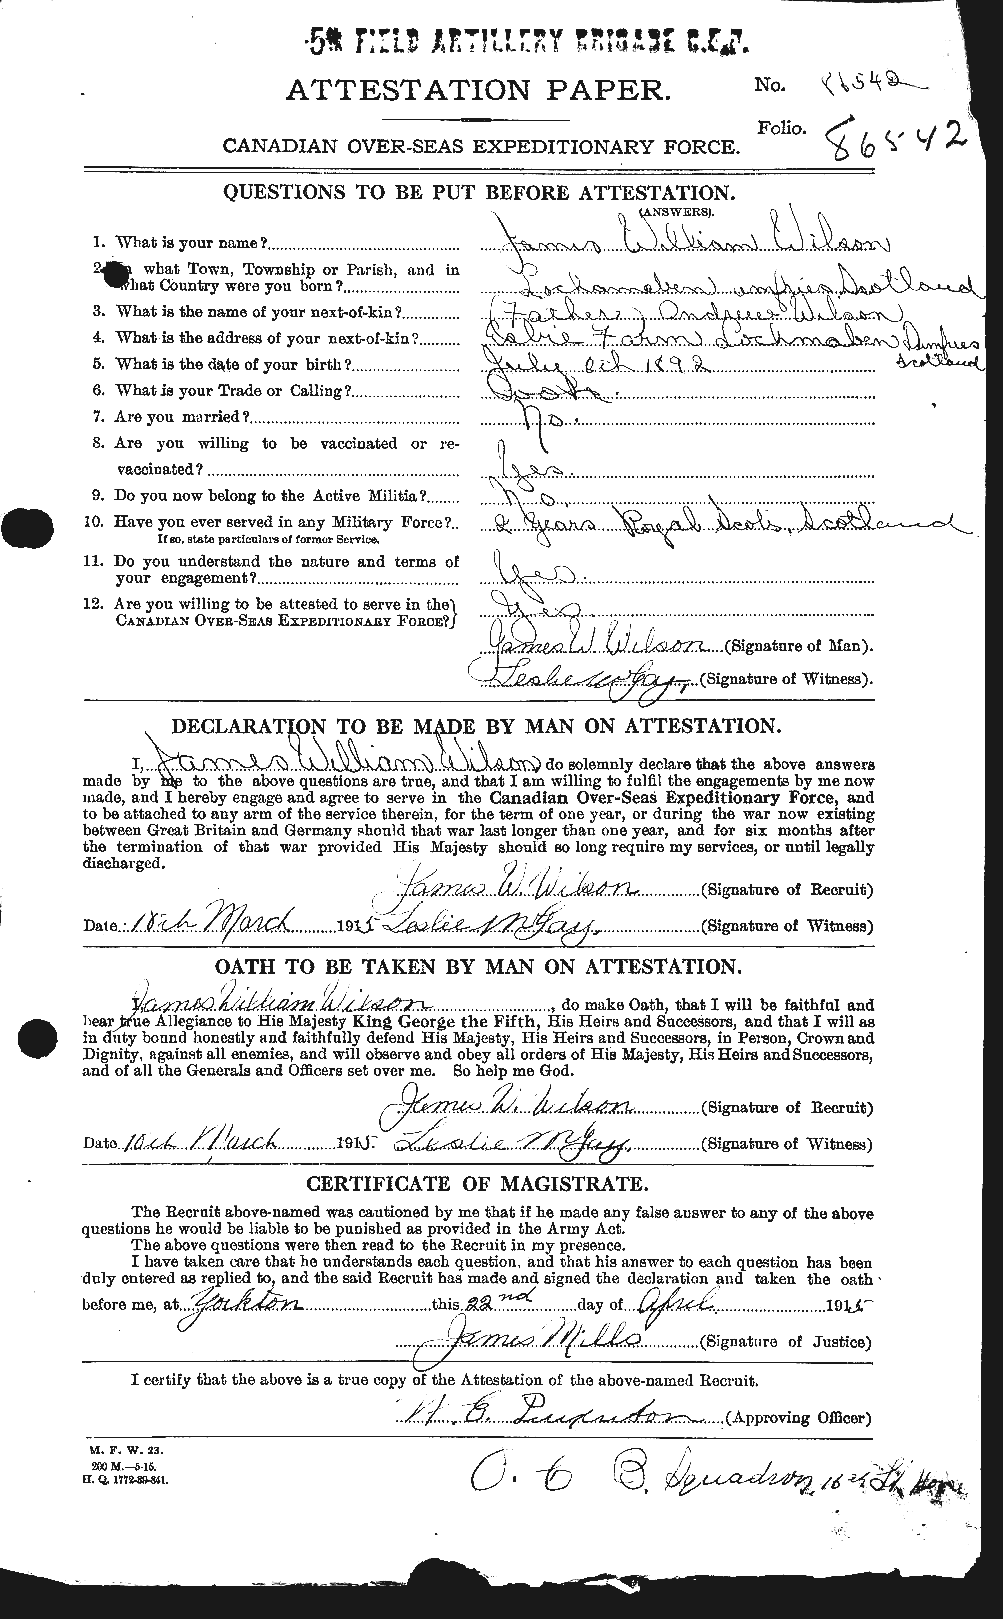 Personnel Records of the First World War - CEF 681512a